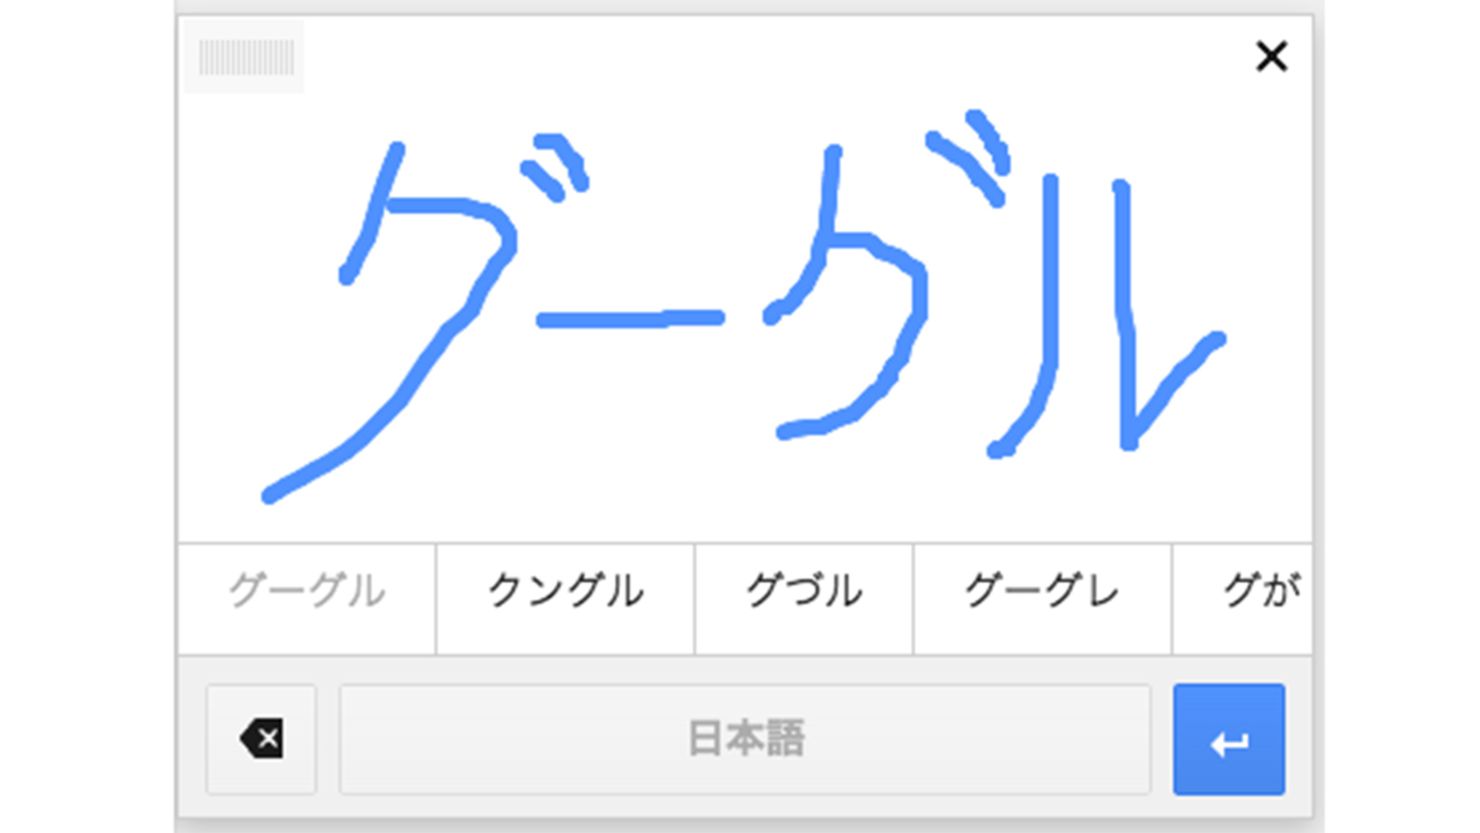 The tool is mainly designed for languages in which some characters are easier to draw than type.